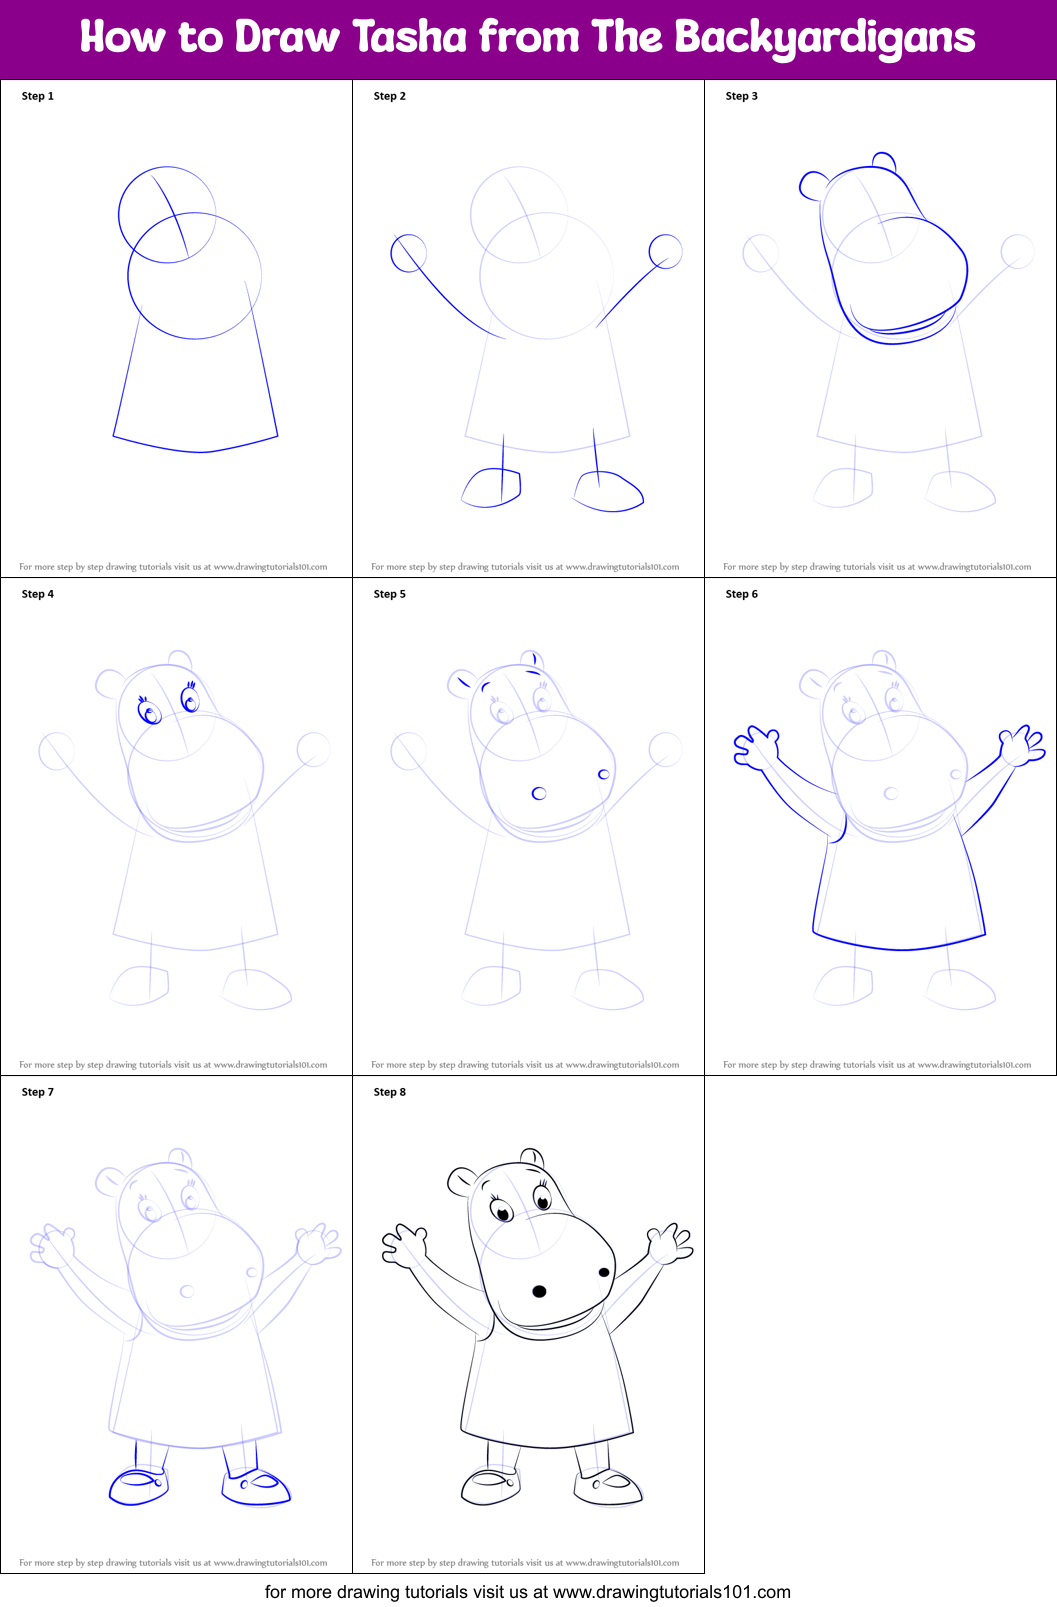 How to Draw Tasha from The Backyardigans printable step by step drawing